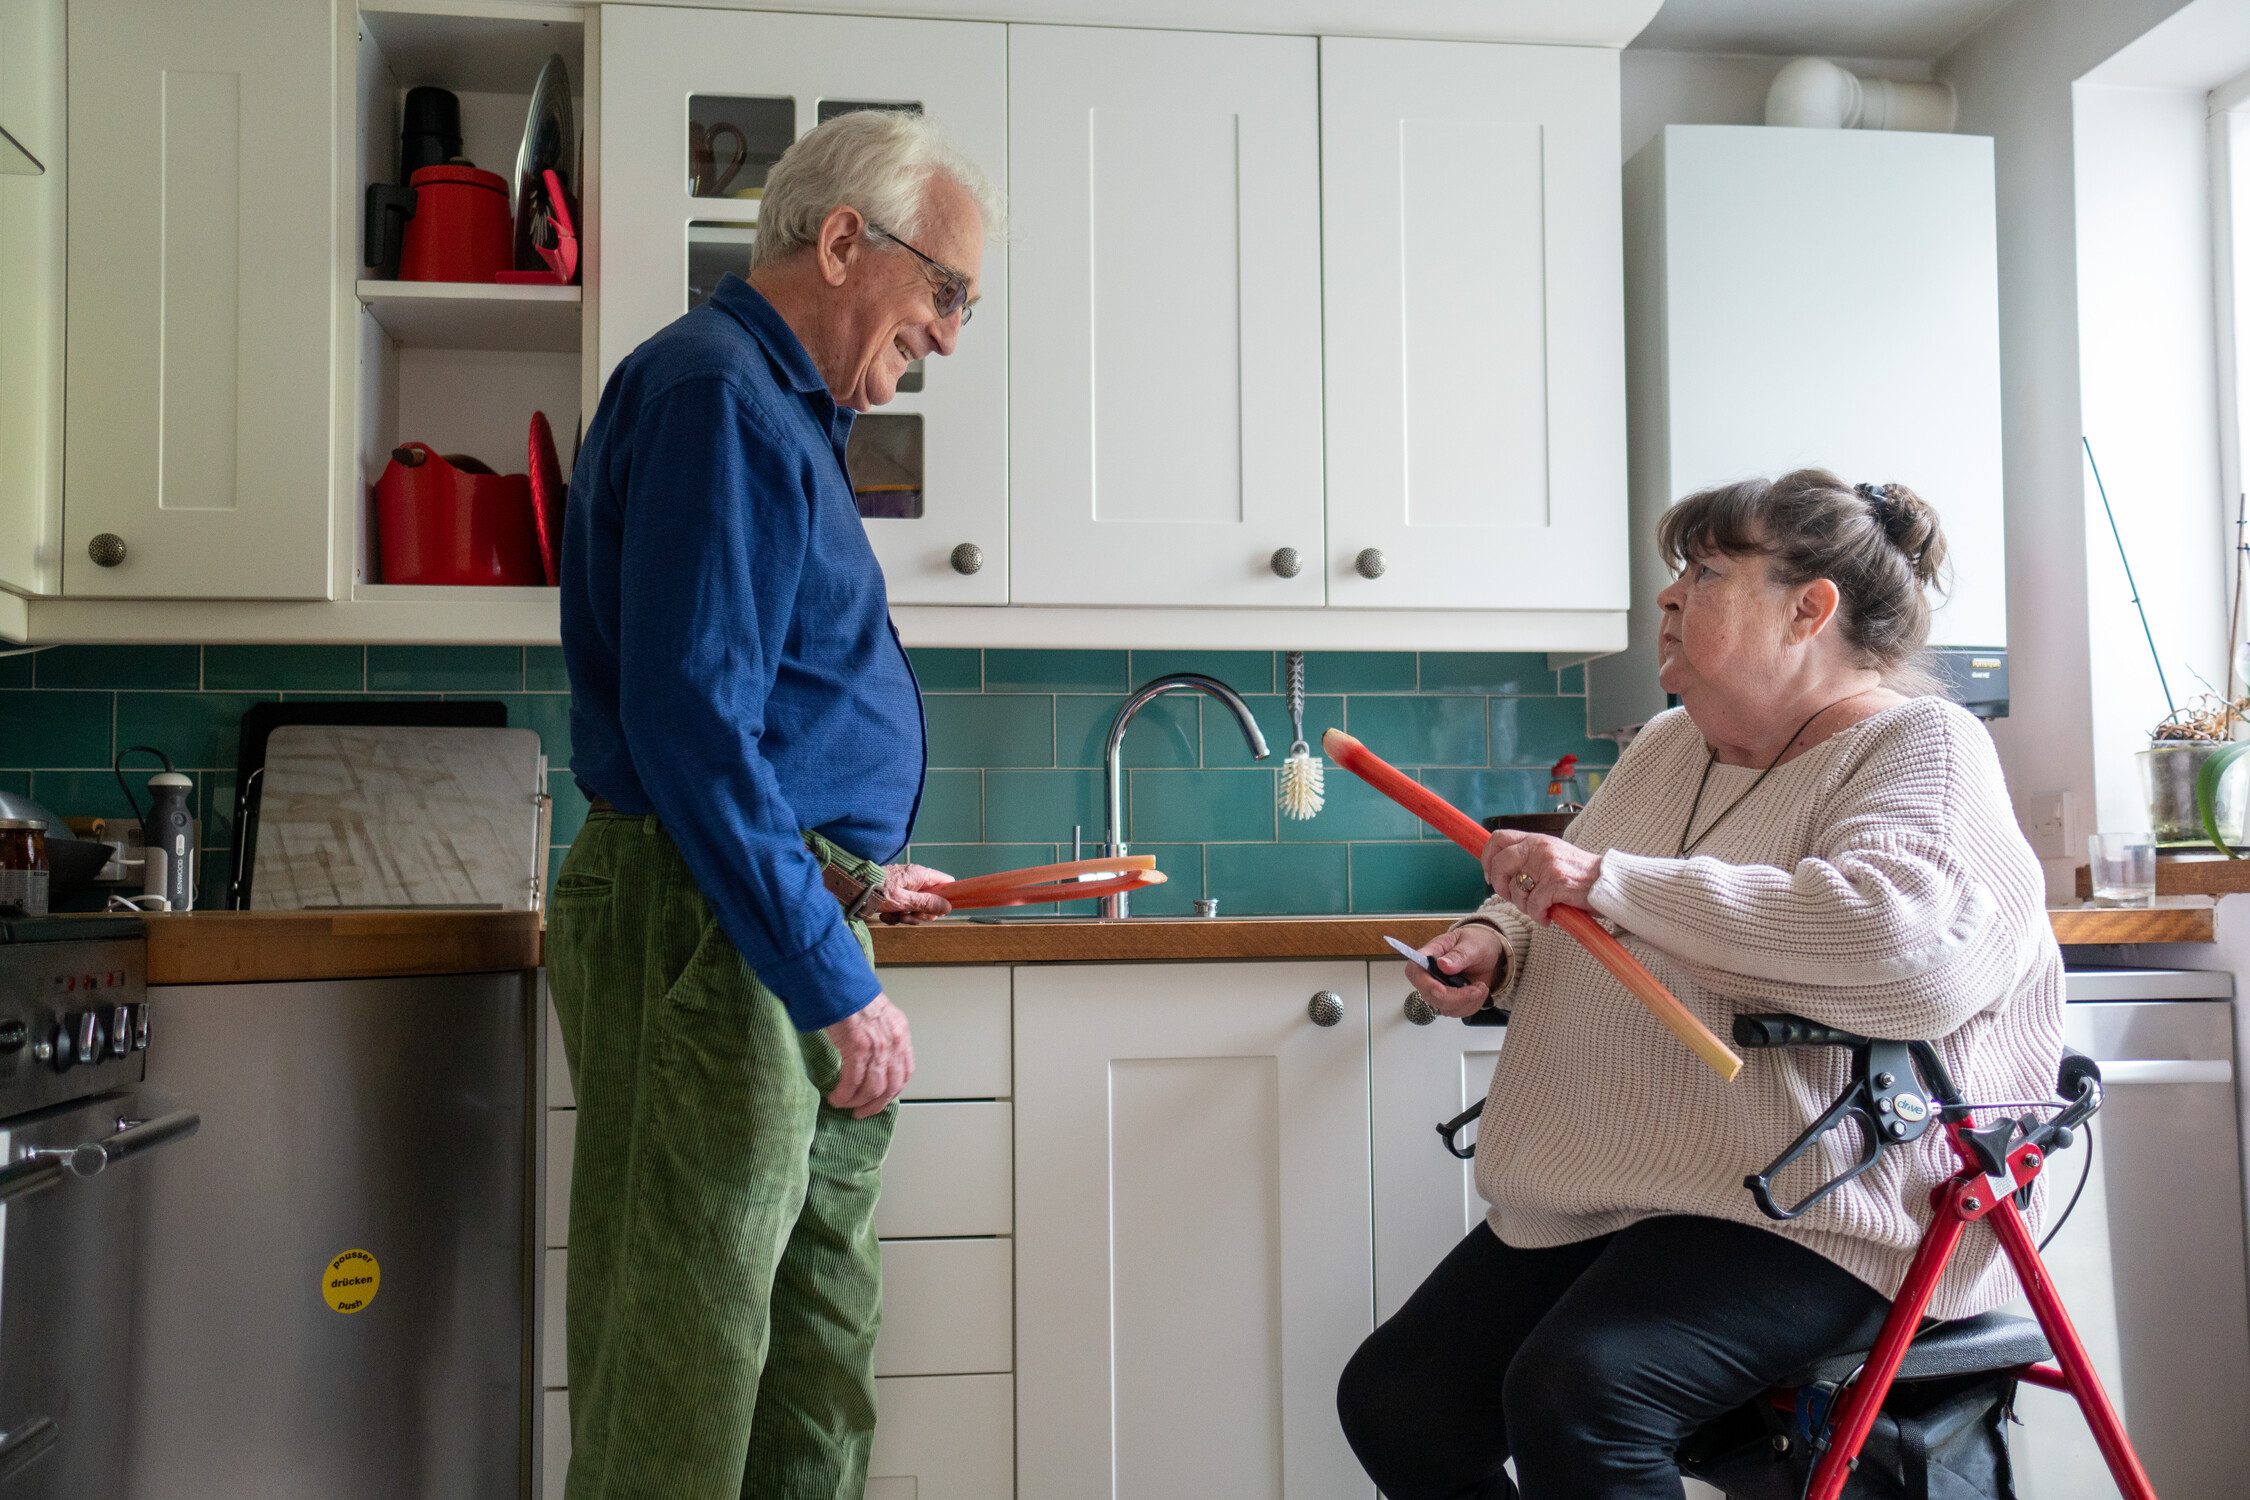 Shortage of the right size homes “has left too many older people in unsuitable housing that can harm their health”